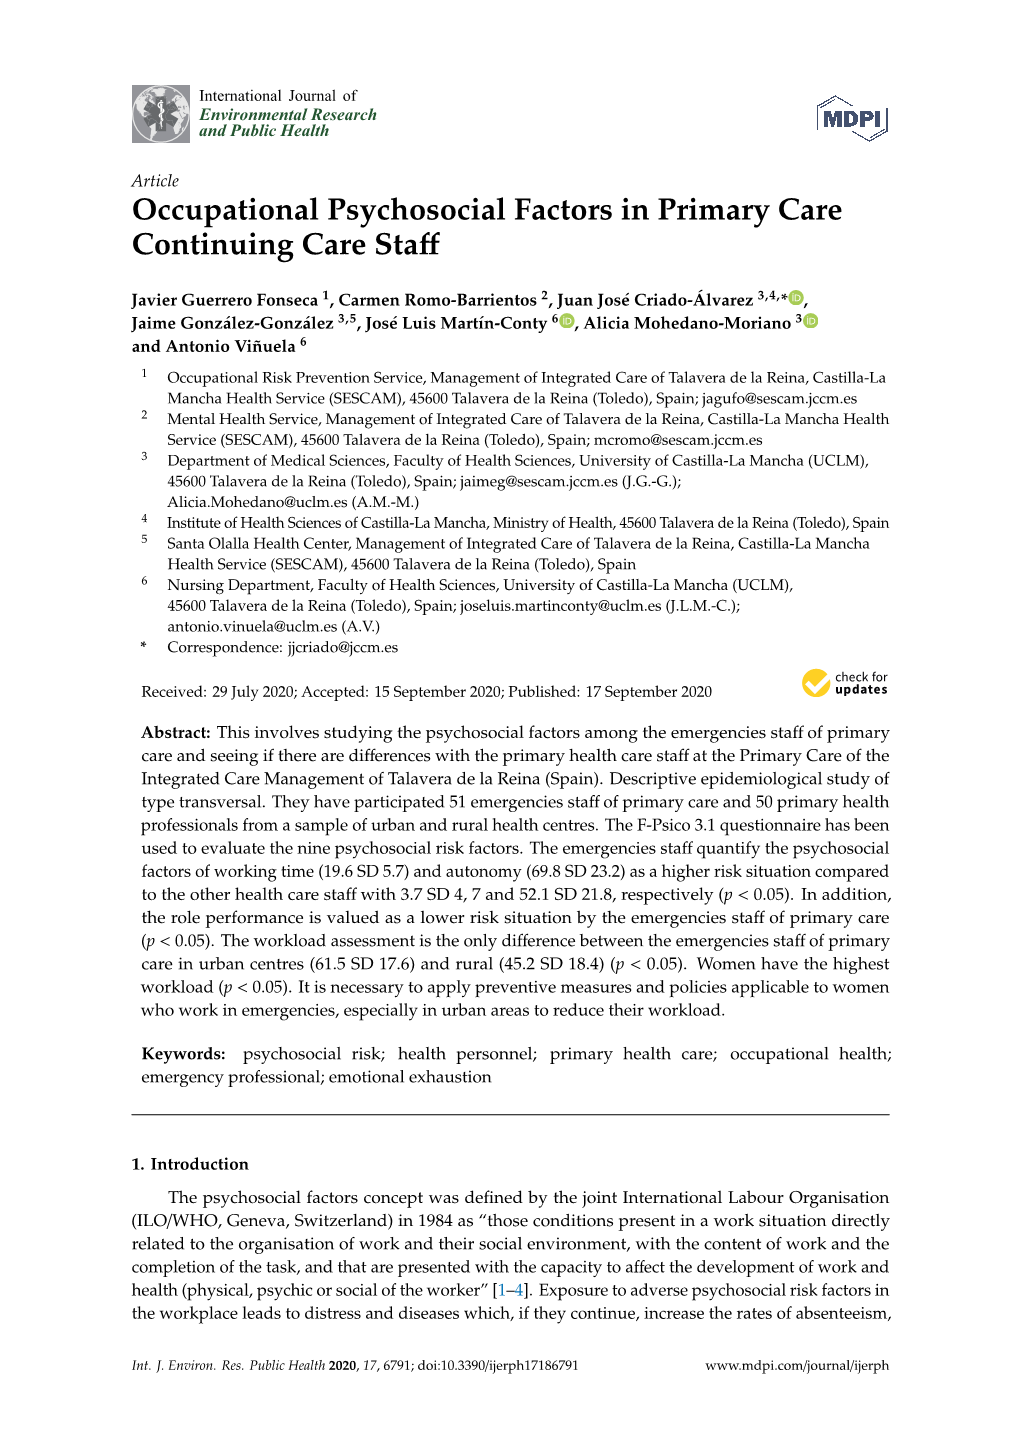 Occupational Psychosocial Factors in Primary Care Continuing Care Staff